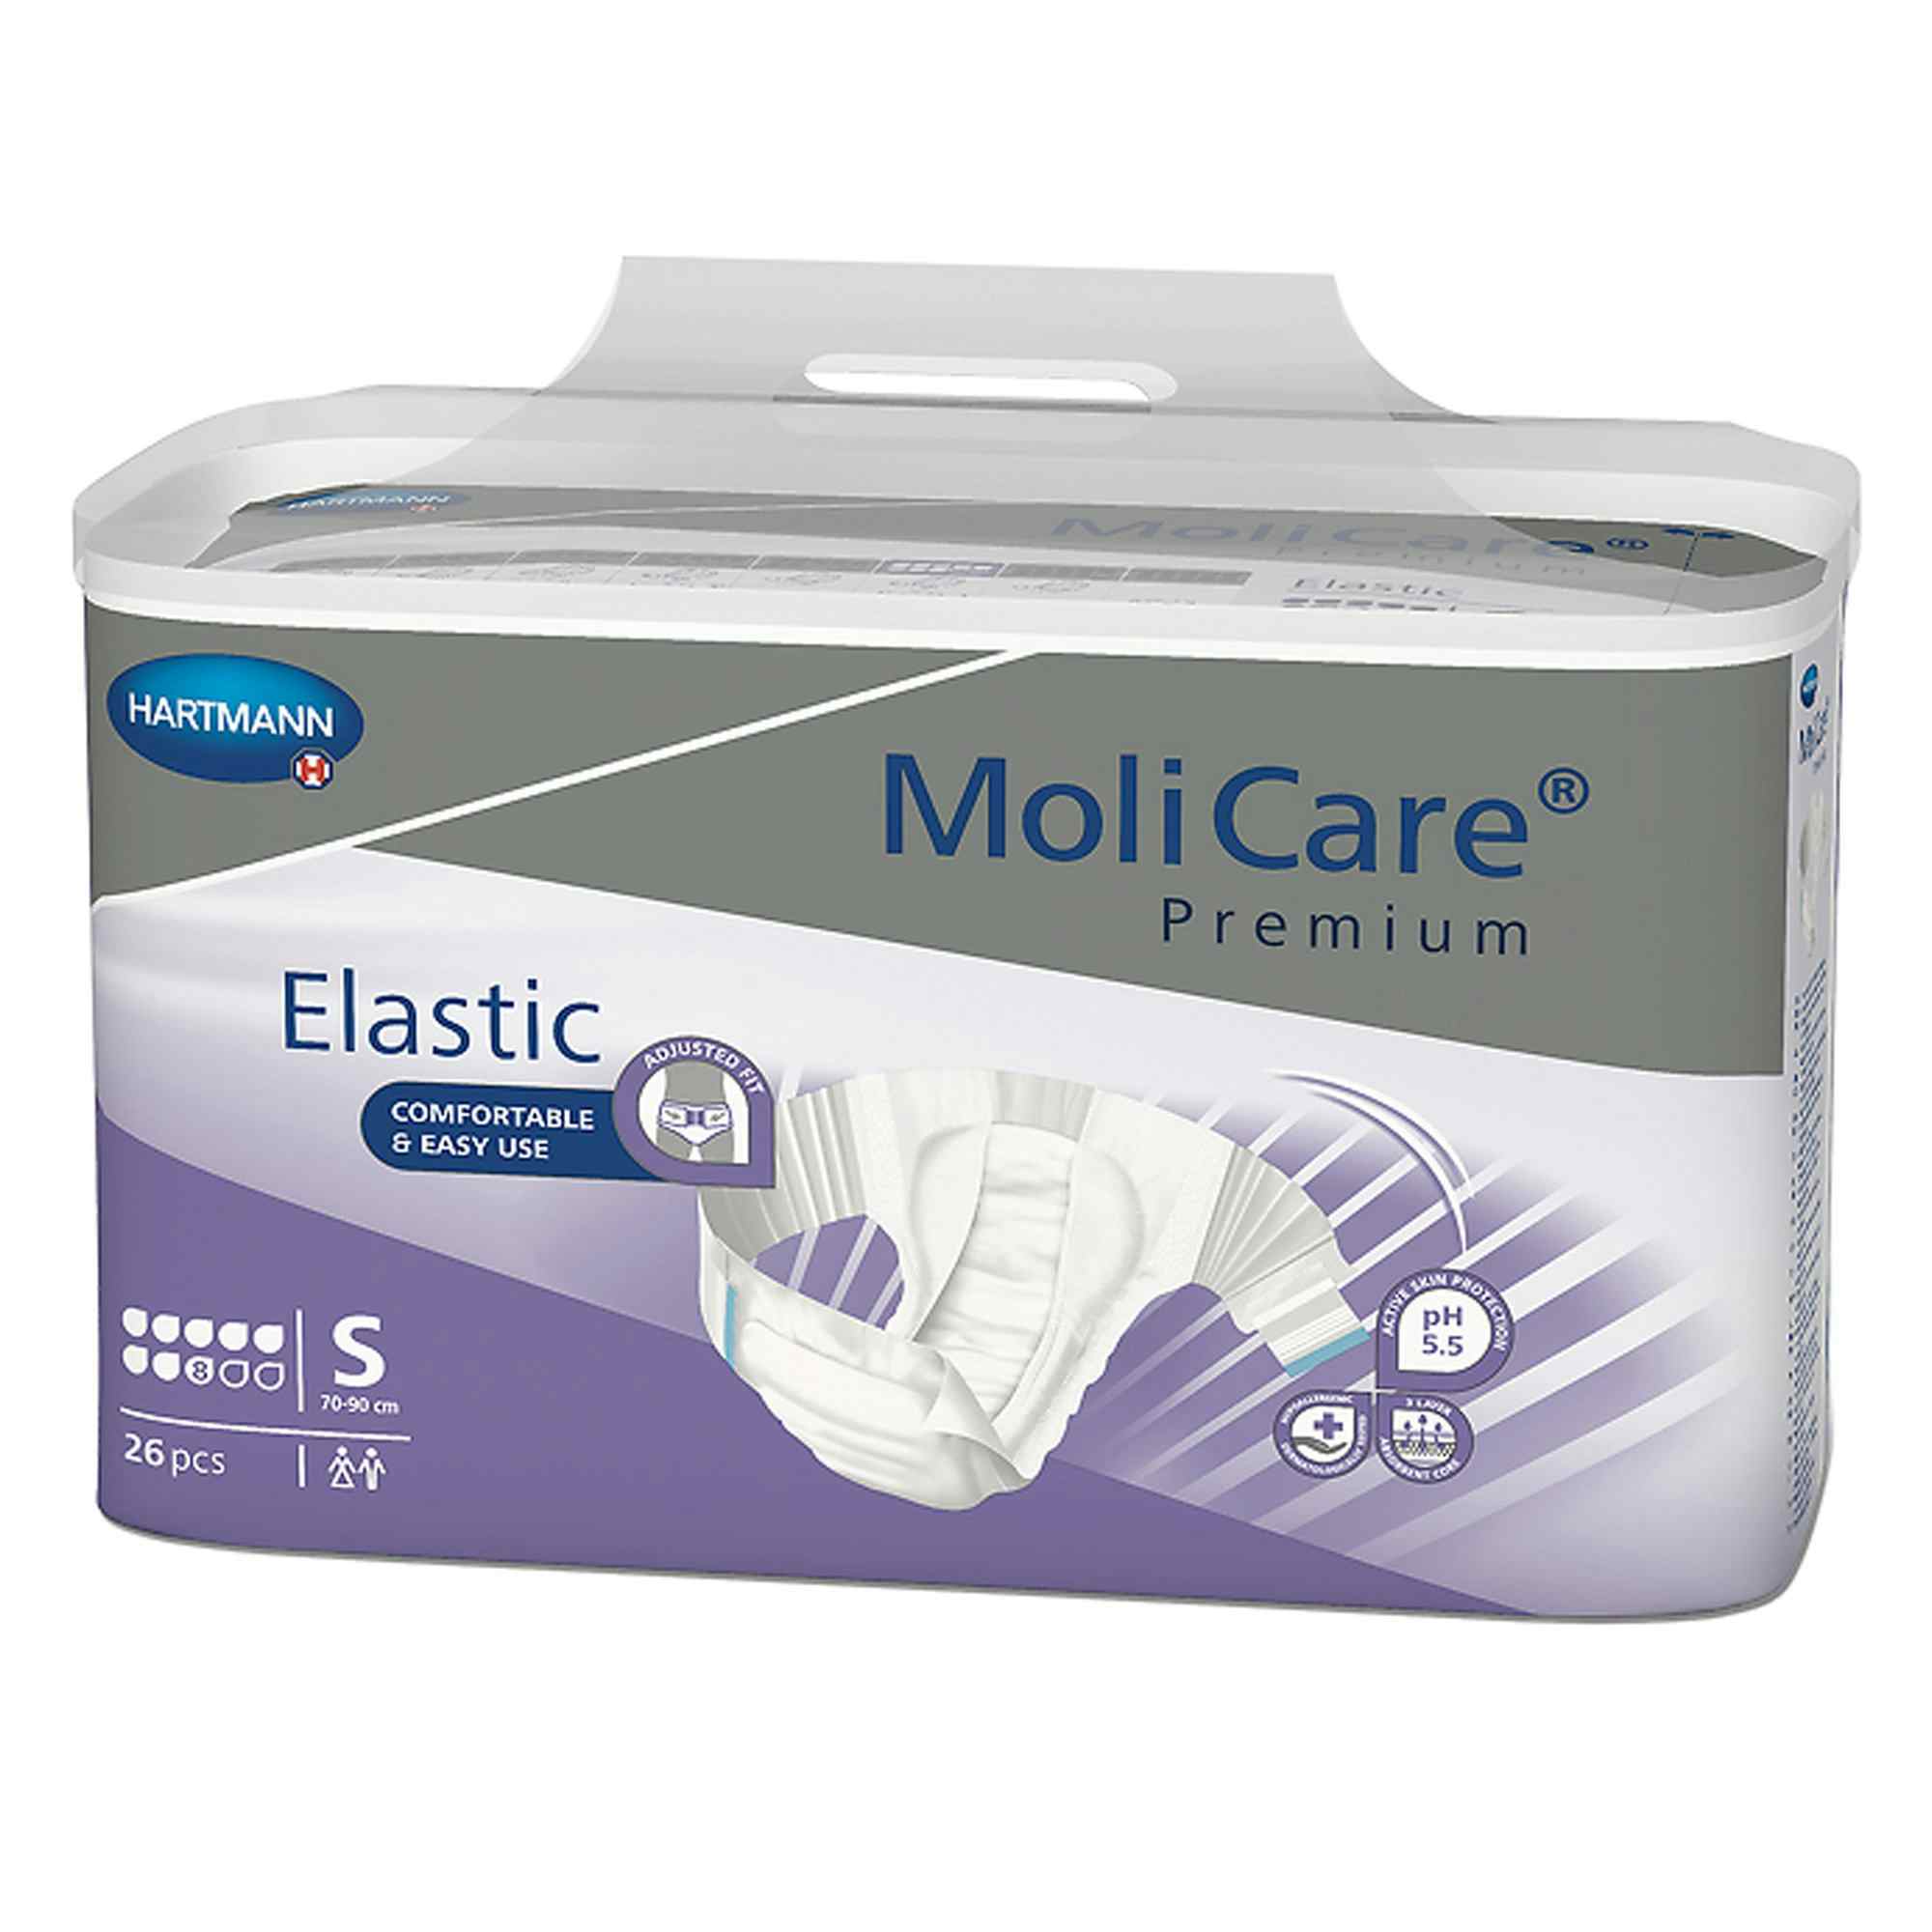 MoliCare Premium 8D Elastic Disposable Brief Adult Diapers with Tabs, Heavy Absorbency, 165471, Small (27-35") - Bag of 30